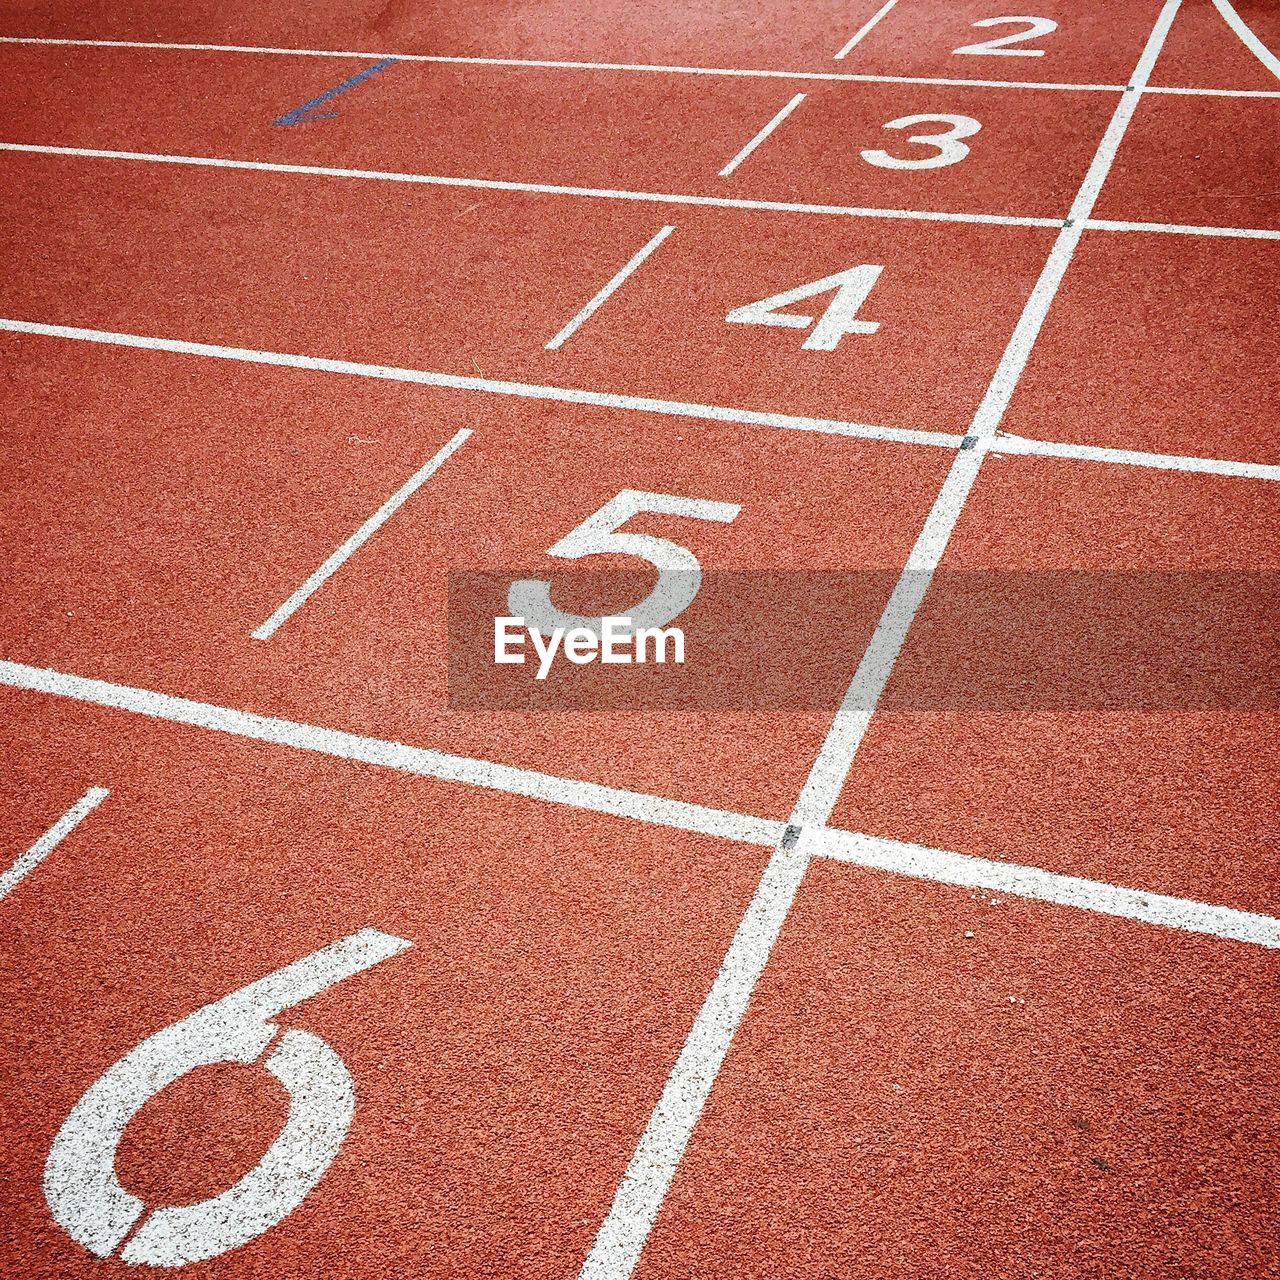 Close-up of numbers on running track